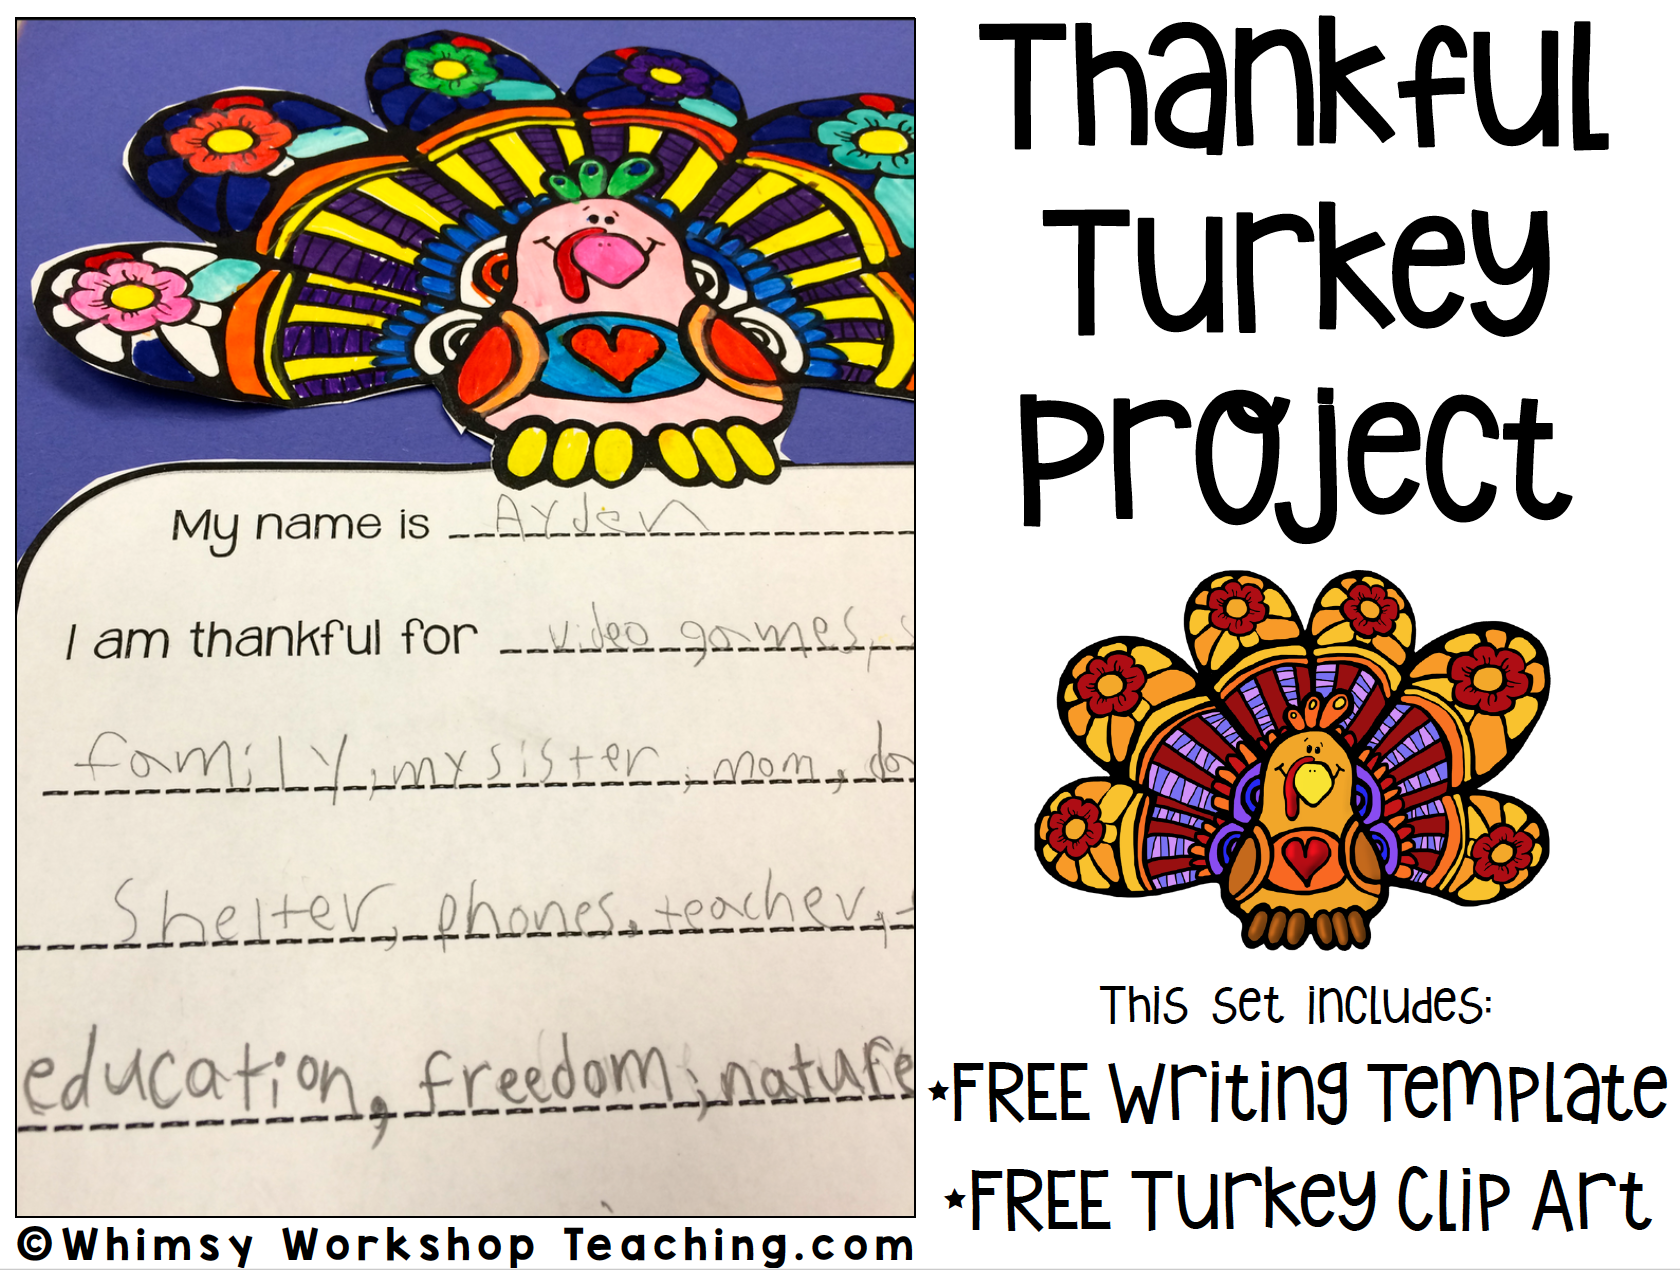 FREE thankful turkey writing project Whimsy